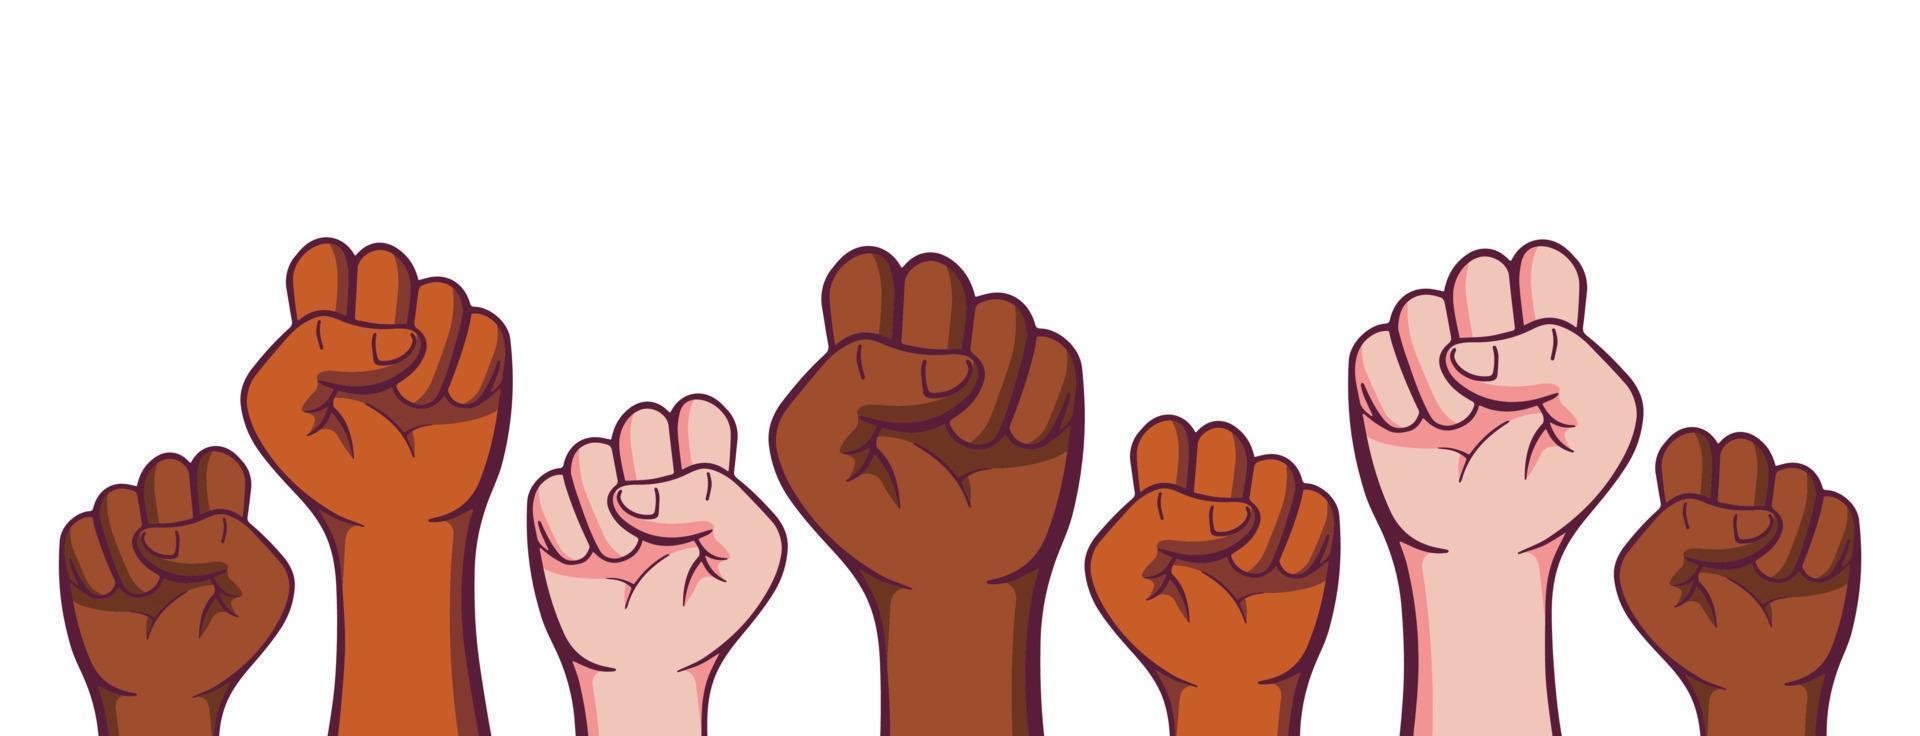 People hands raised with clenched fists, isolated on a white background. vector